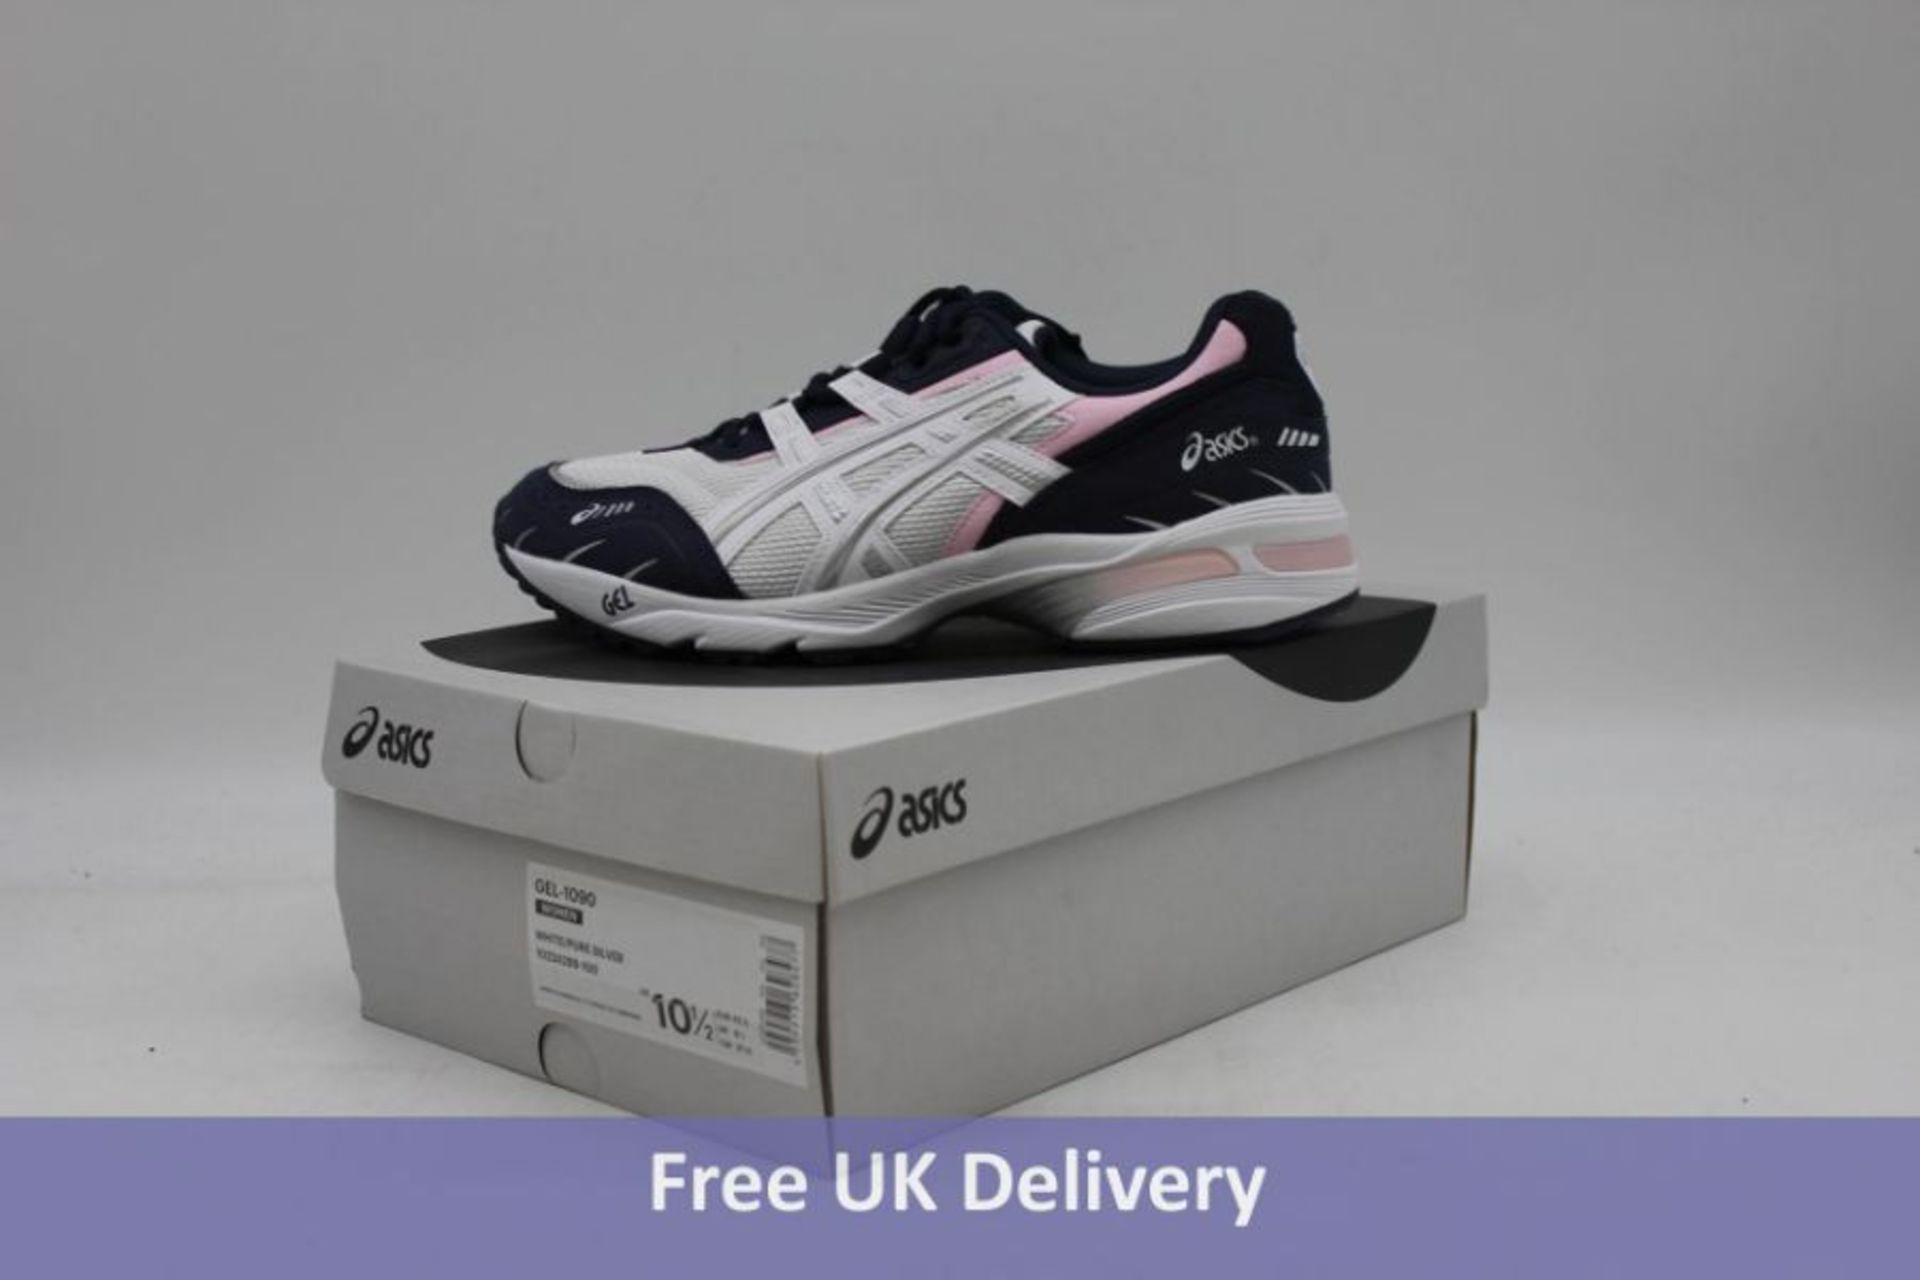 Two Asics Gel-1090 Women's Trainers, White/Navy/Silver/Pink, 1x UK 8.5, 1x UK 9